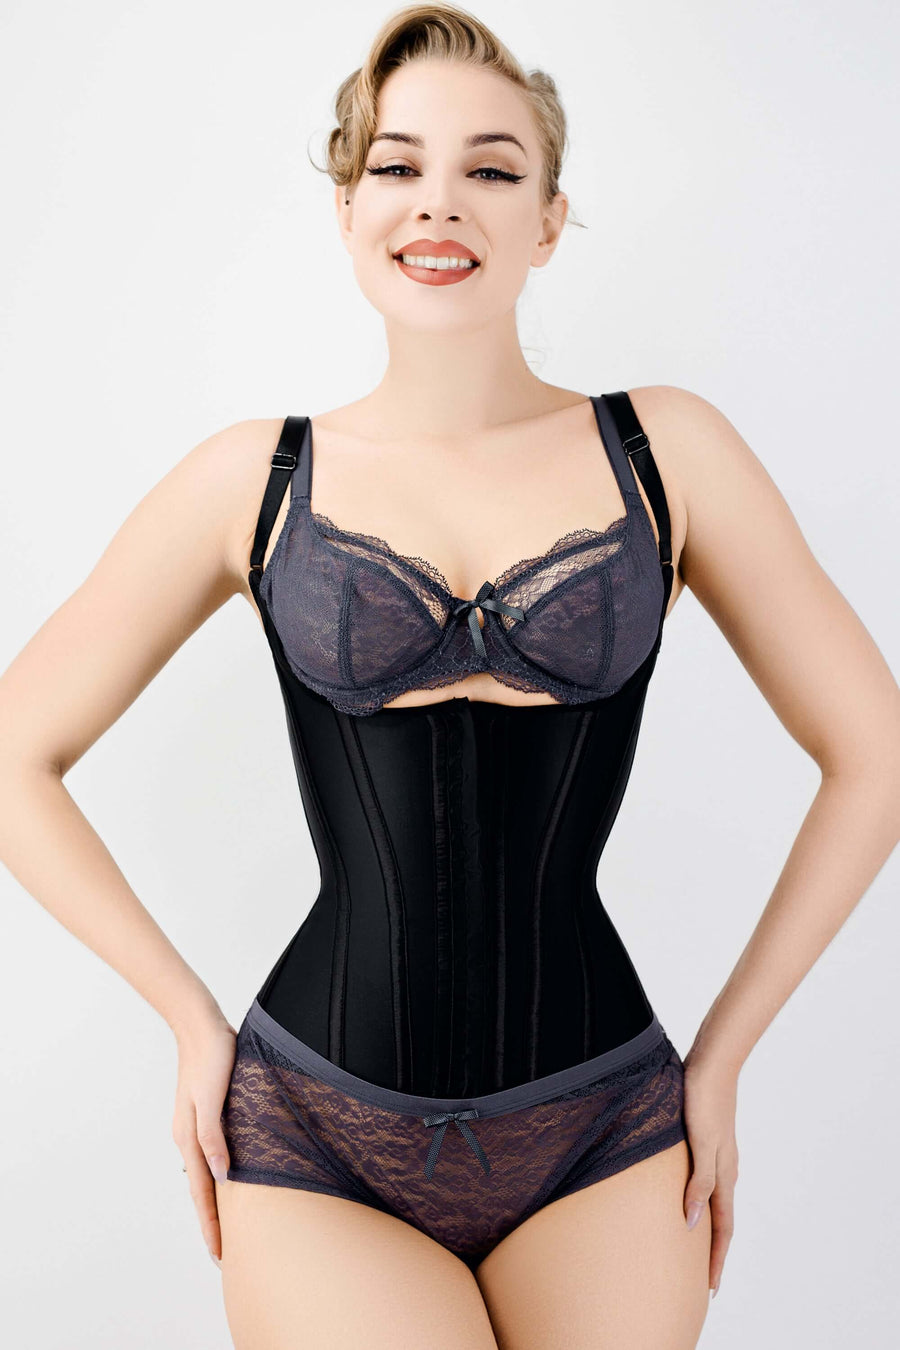 Classic vintage style longline girdle with 6 suspender straps